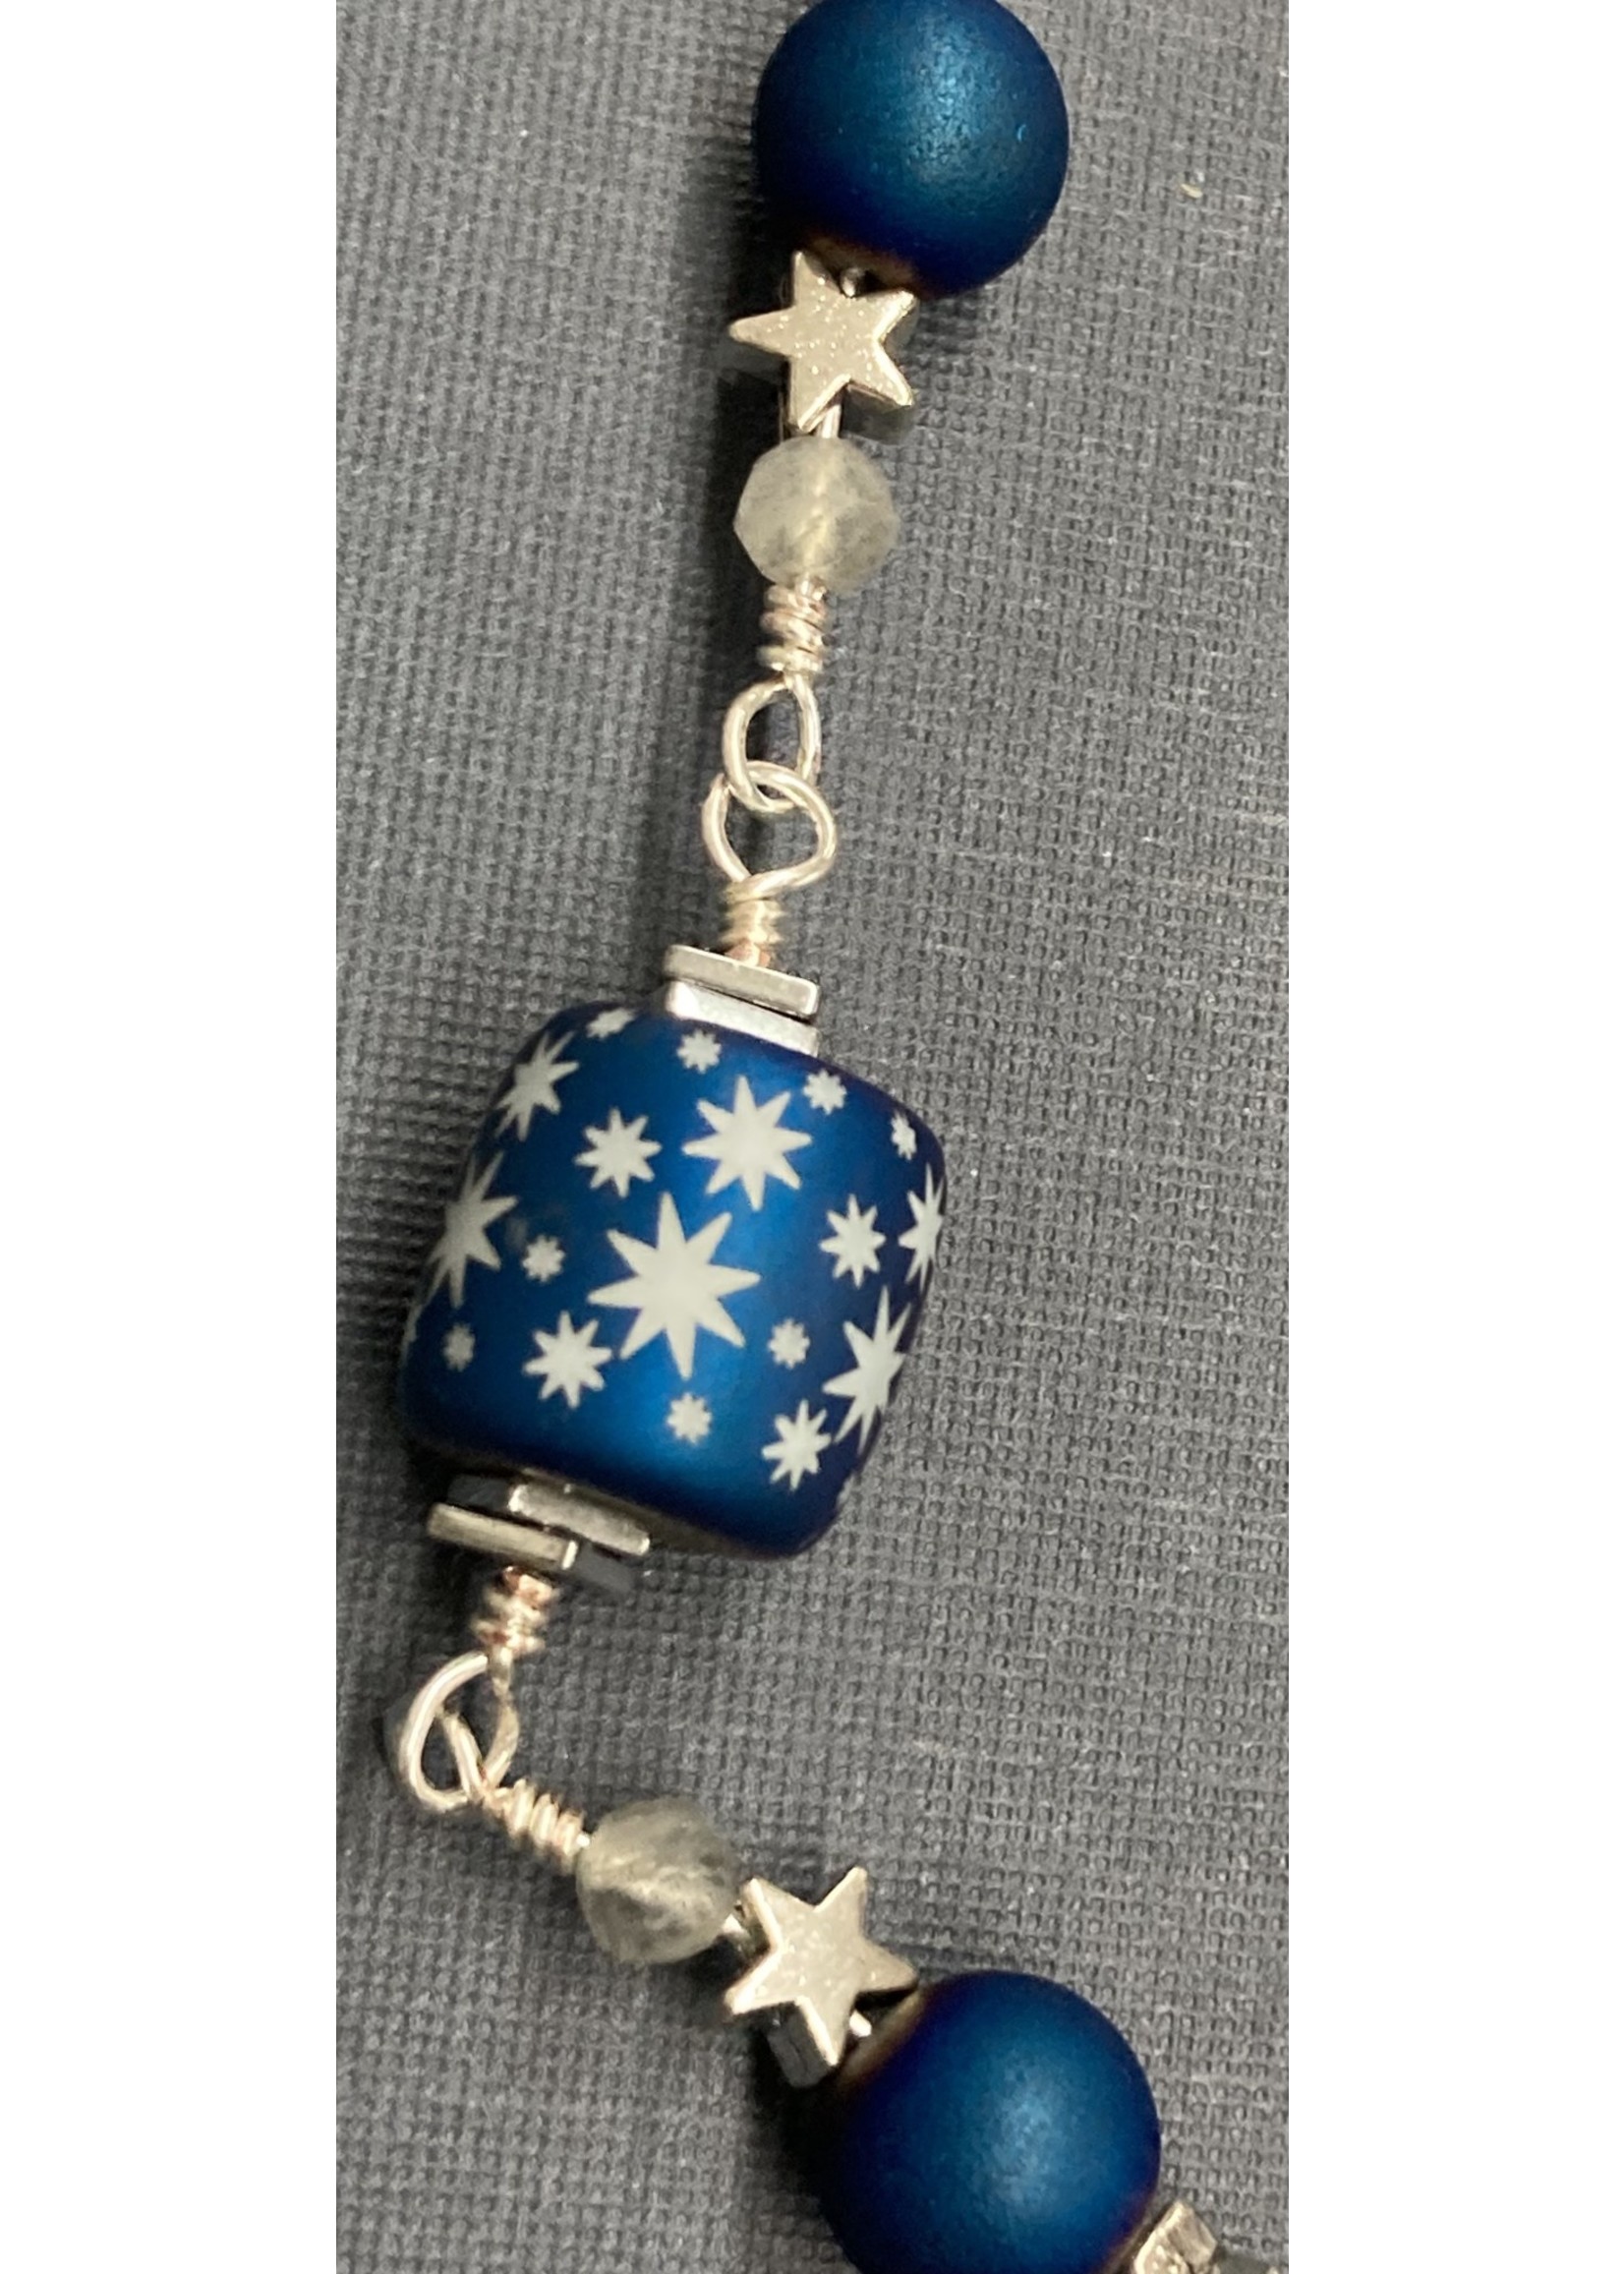 Our Twisted Dahlia B006 Iridescent Blue Barrel Beads with Stars, Hematite, Labradorite Beads, and Silver Star Bracelet